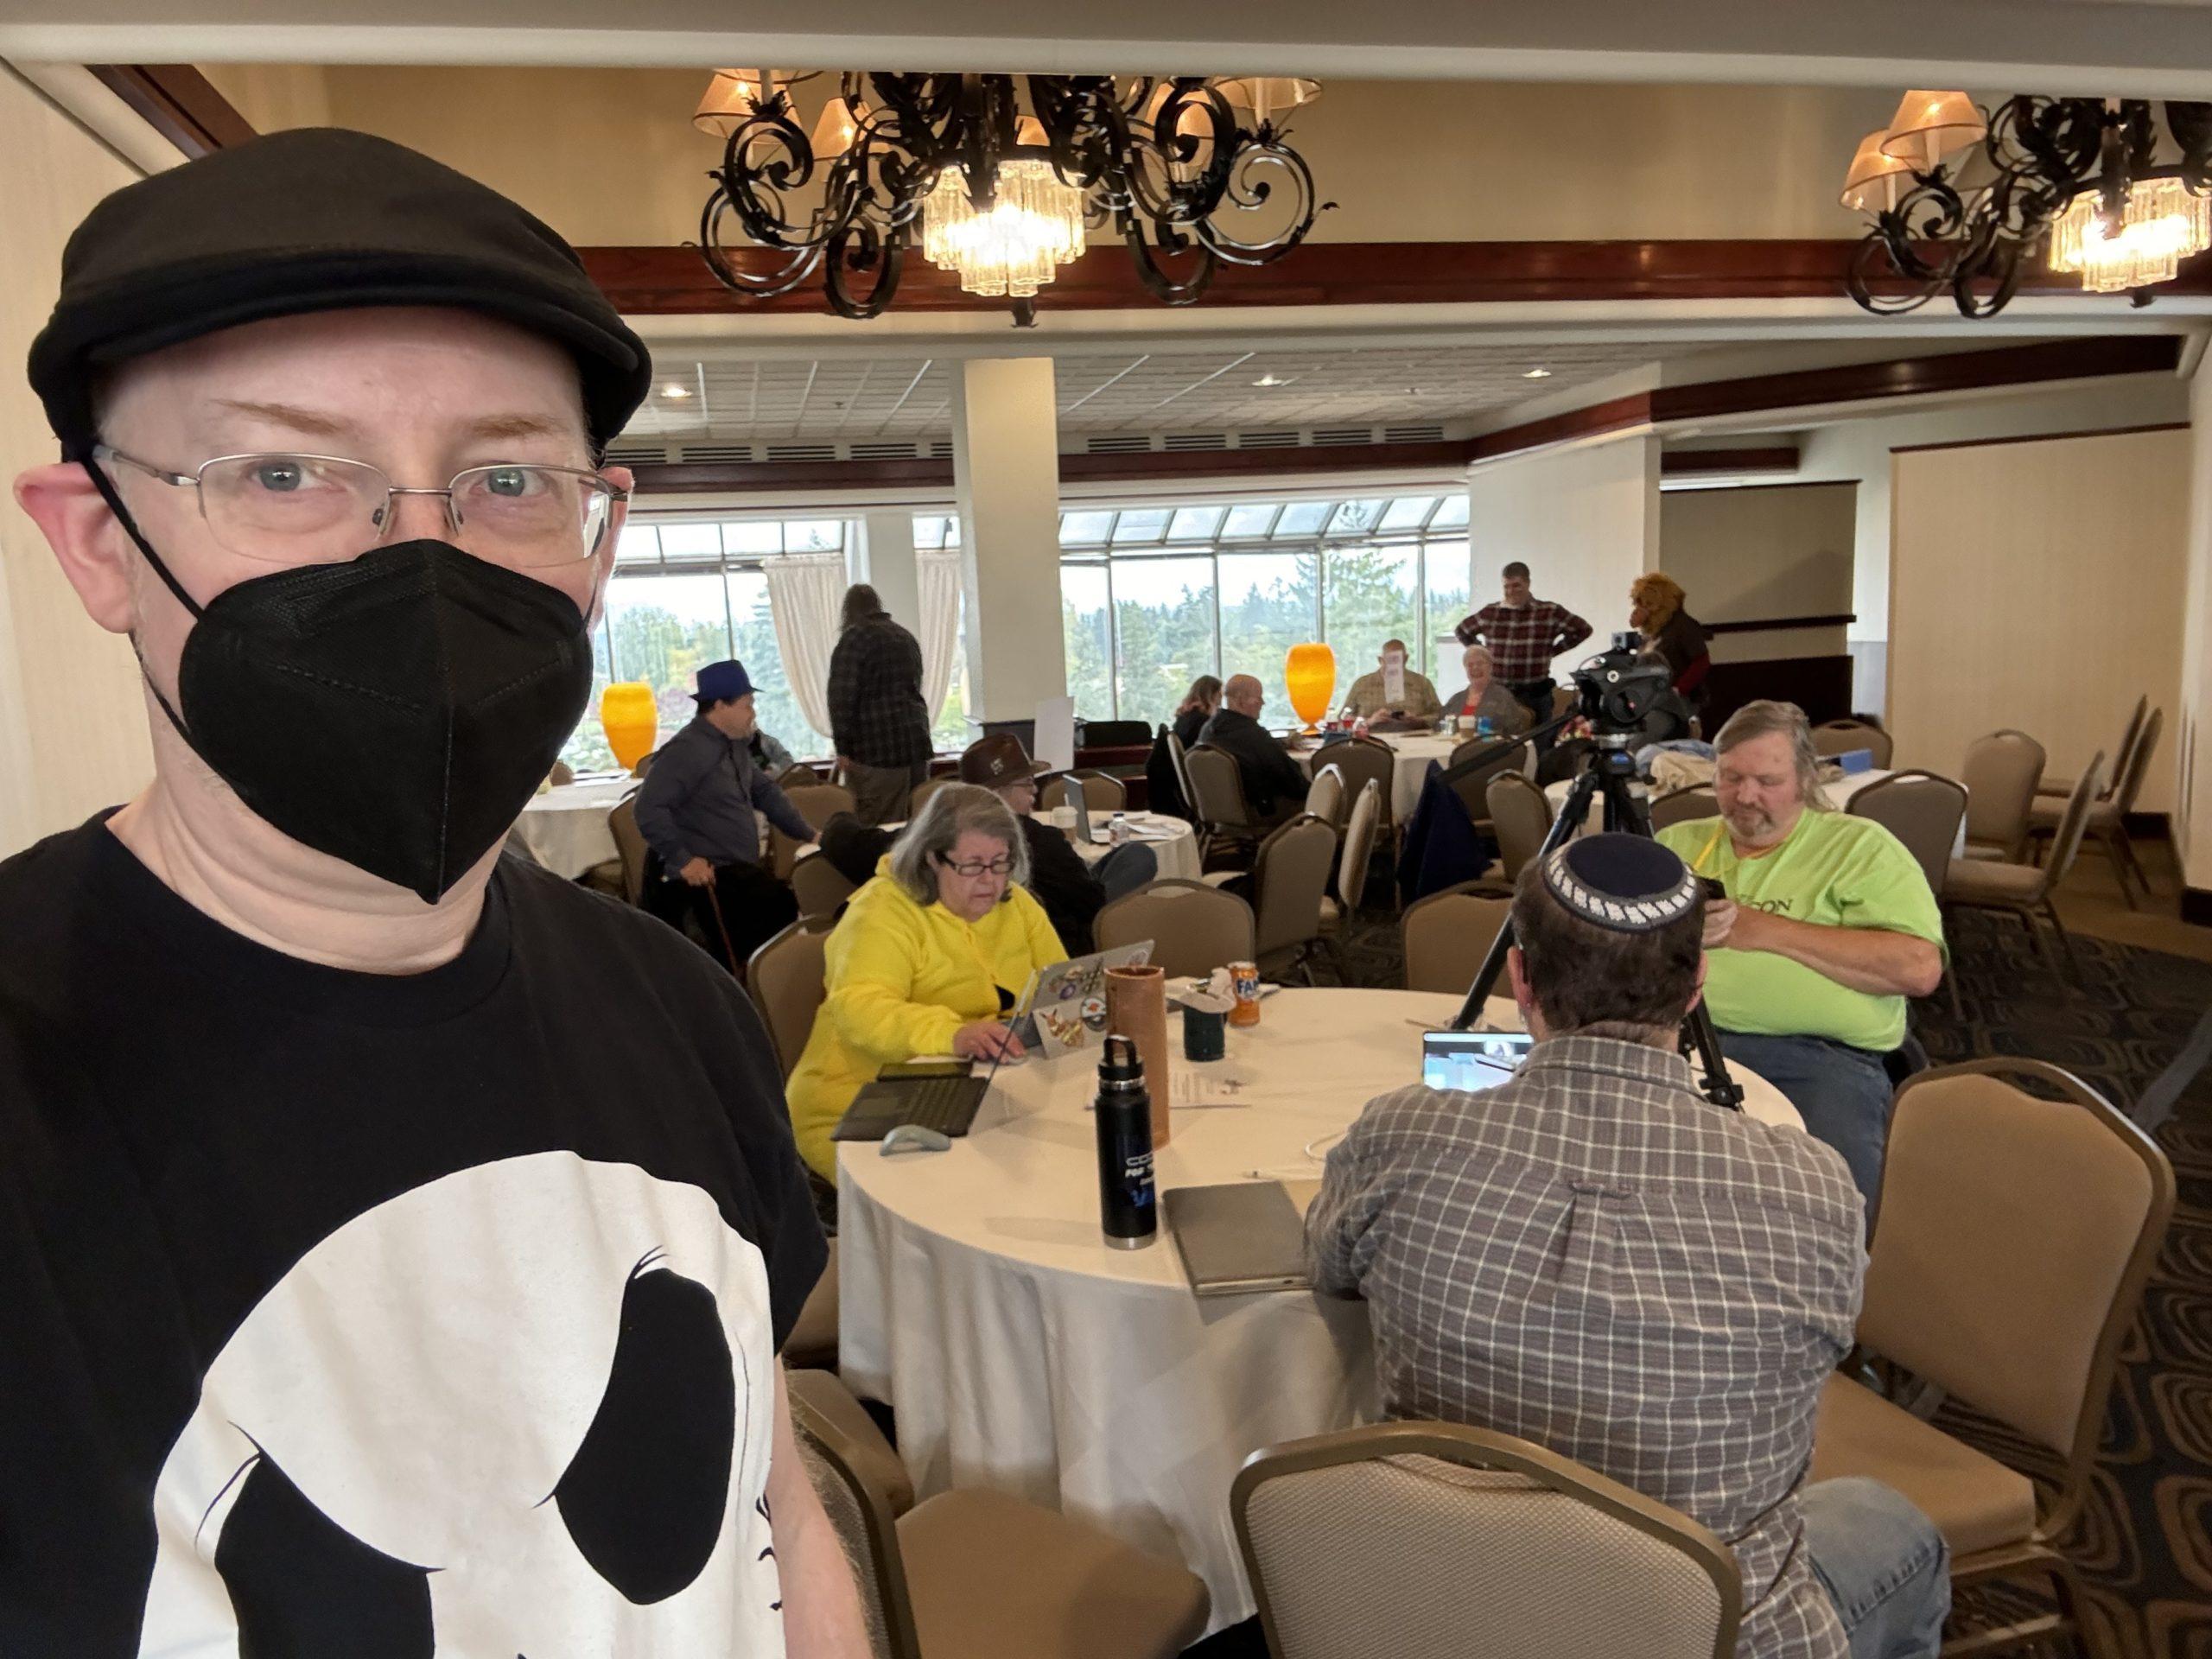 Me, wearing a Jack Skellington t-shirt and black facemask, standing in a hotel meeting room with a number of other people sitting at tables and chatting with each other behind me.